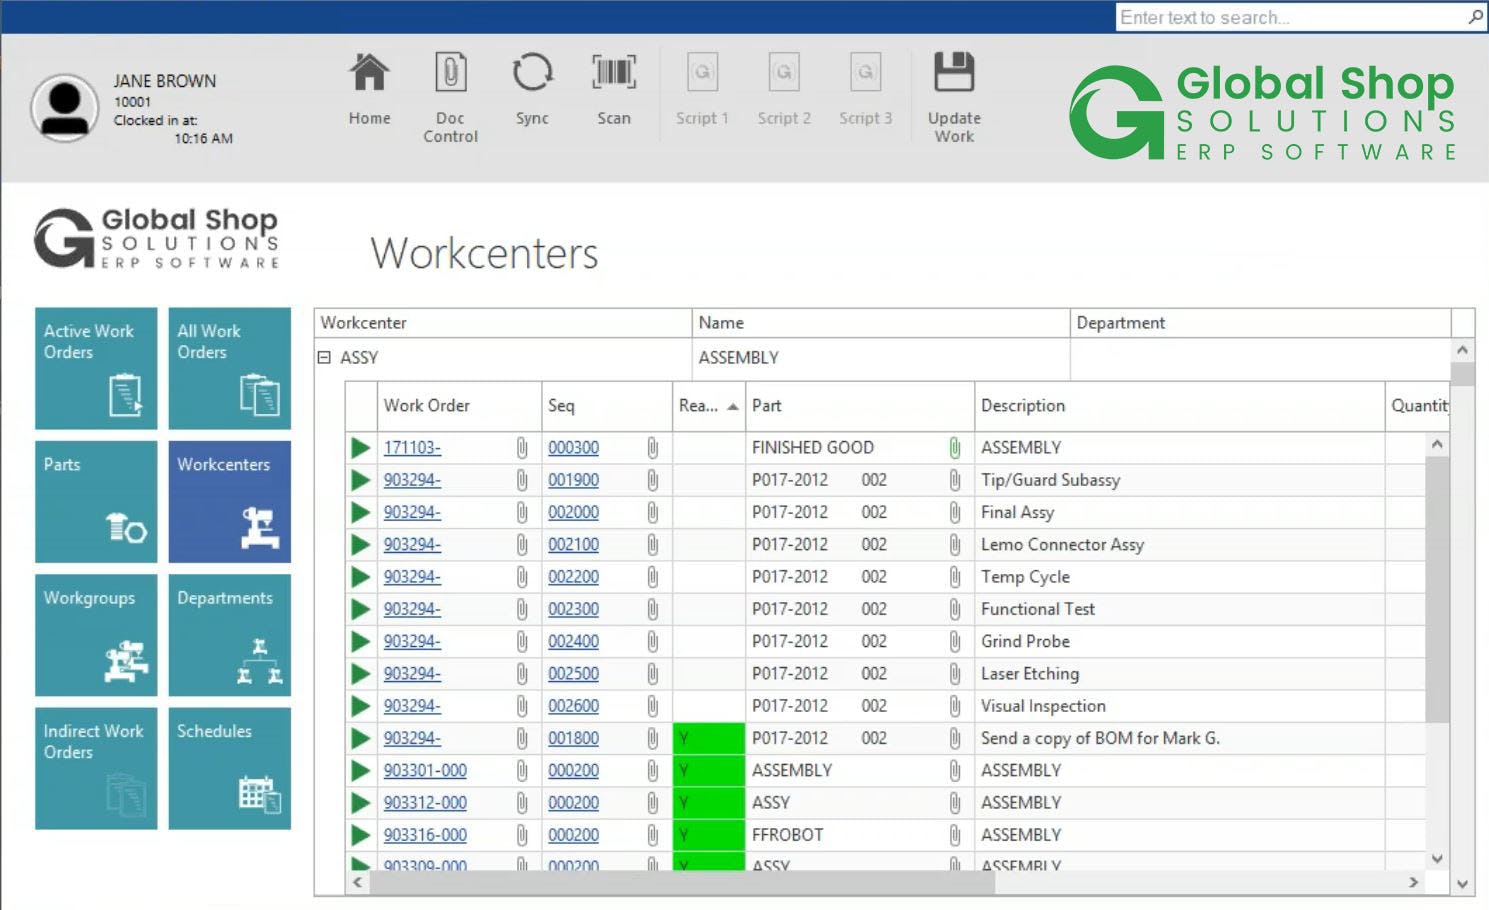 Global Shop Solutions Software - Global Shop Solutions Workcenters